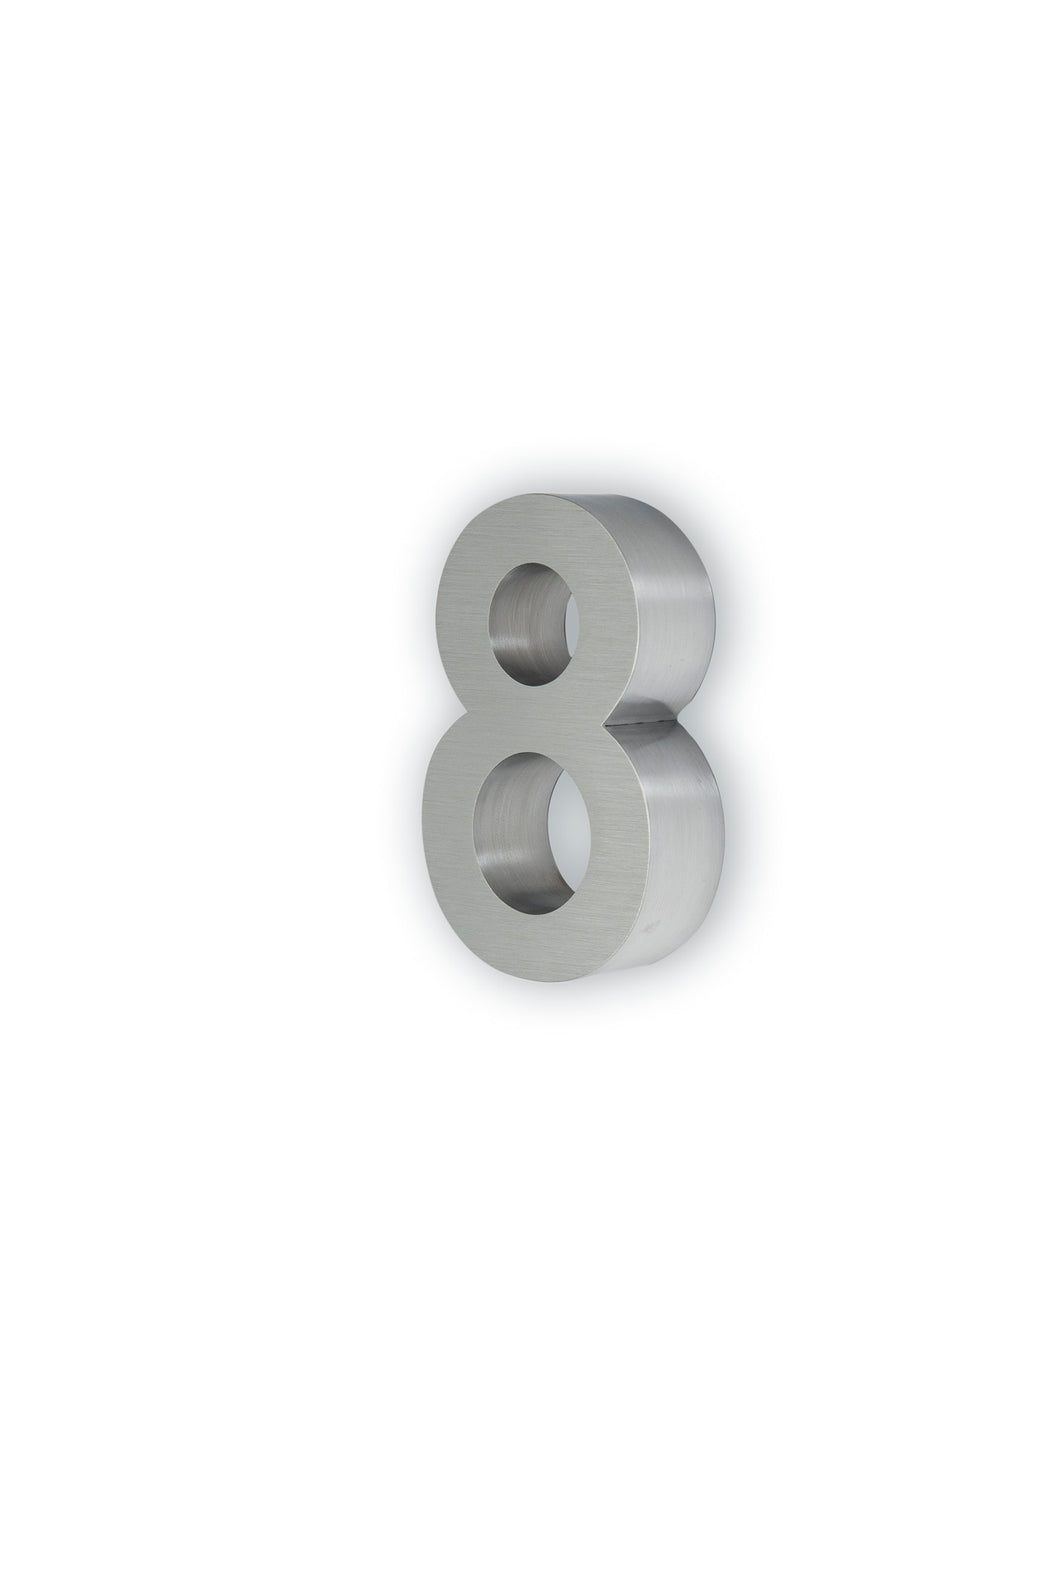 6 Inch 3D Stainless Steel House Number Eight